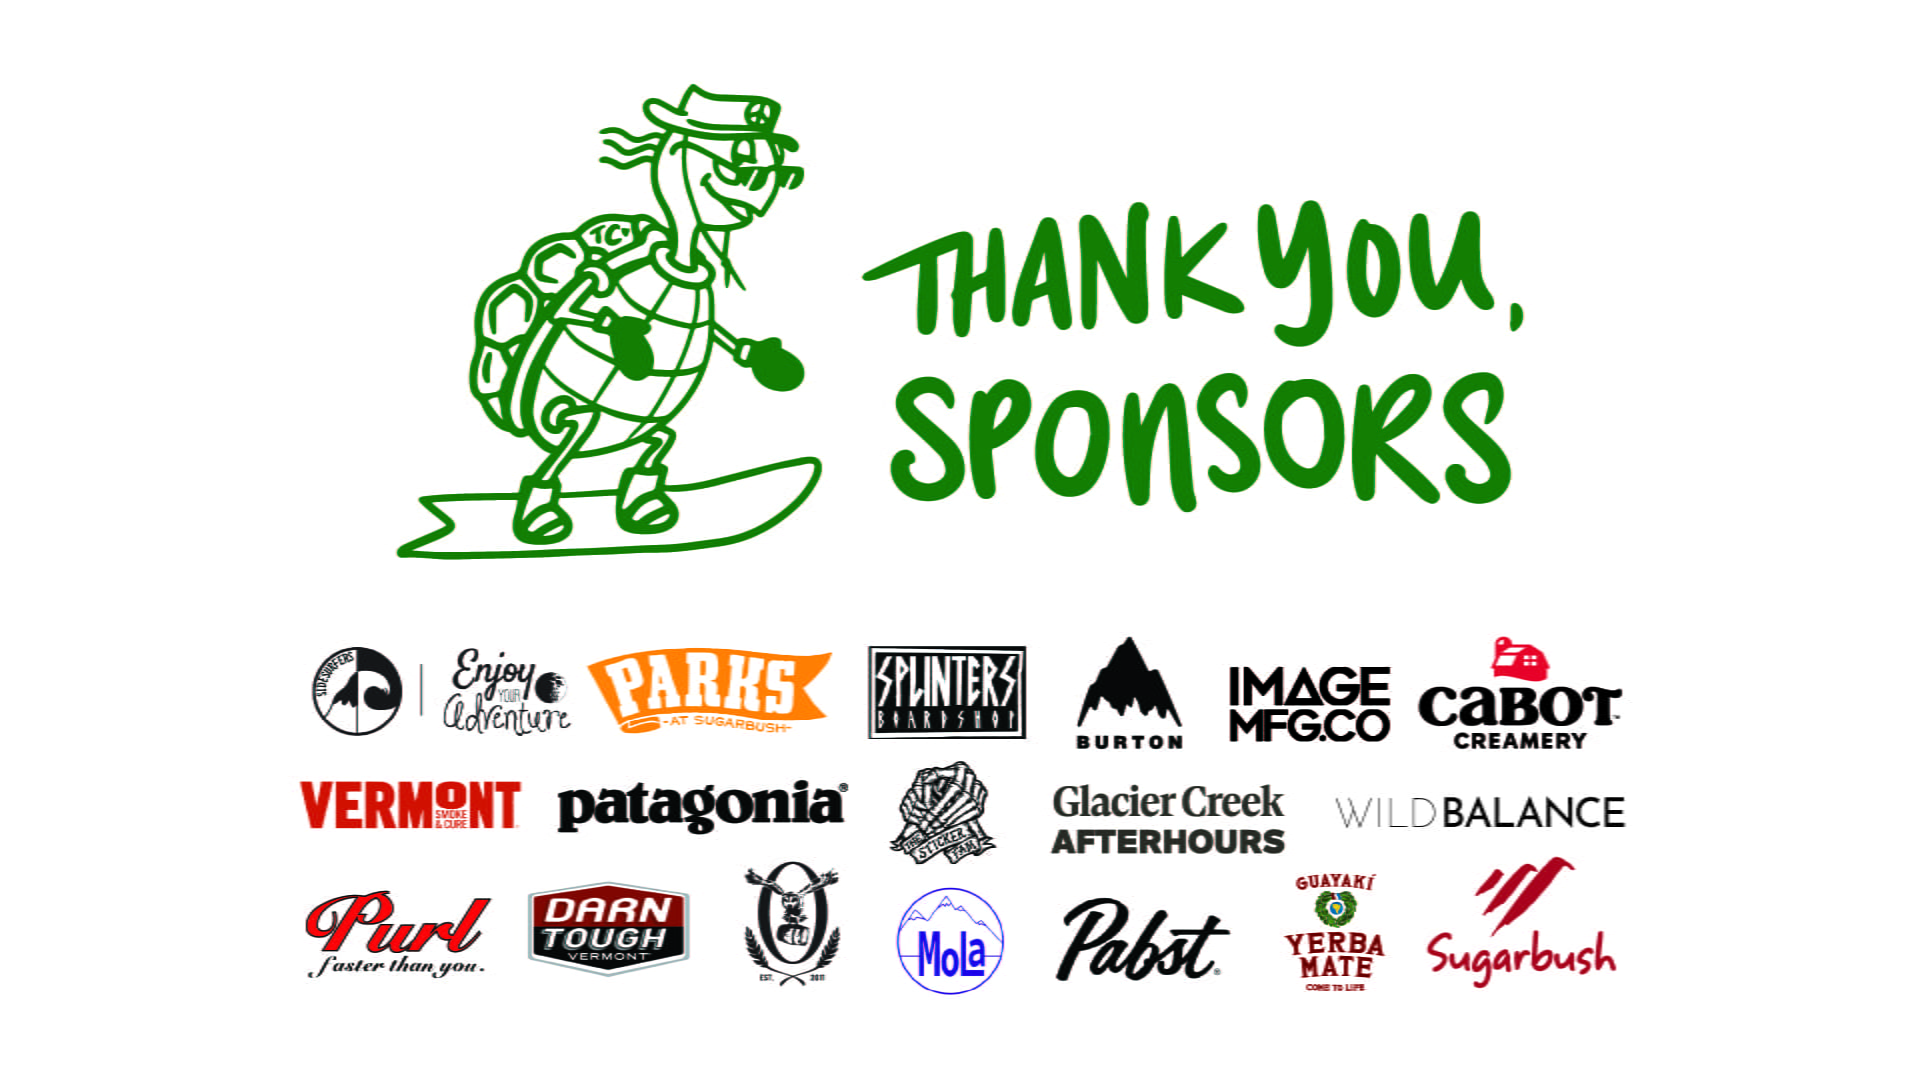 banked slalom event sponsor thank you graphic